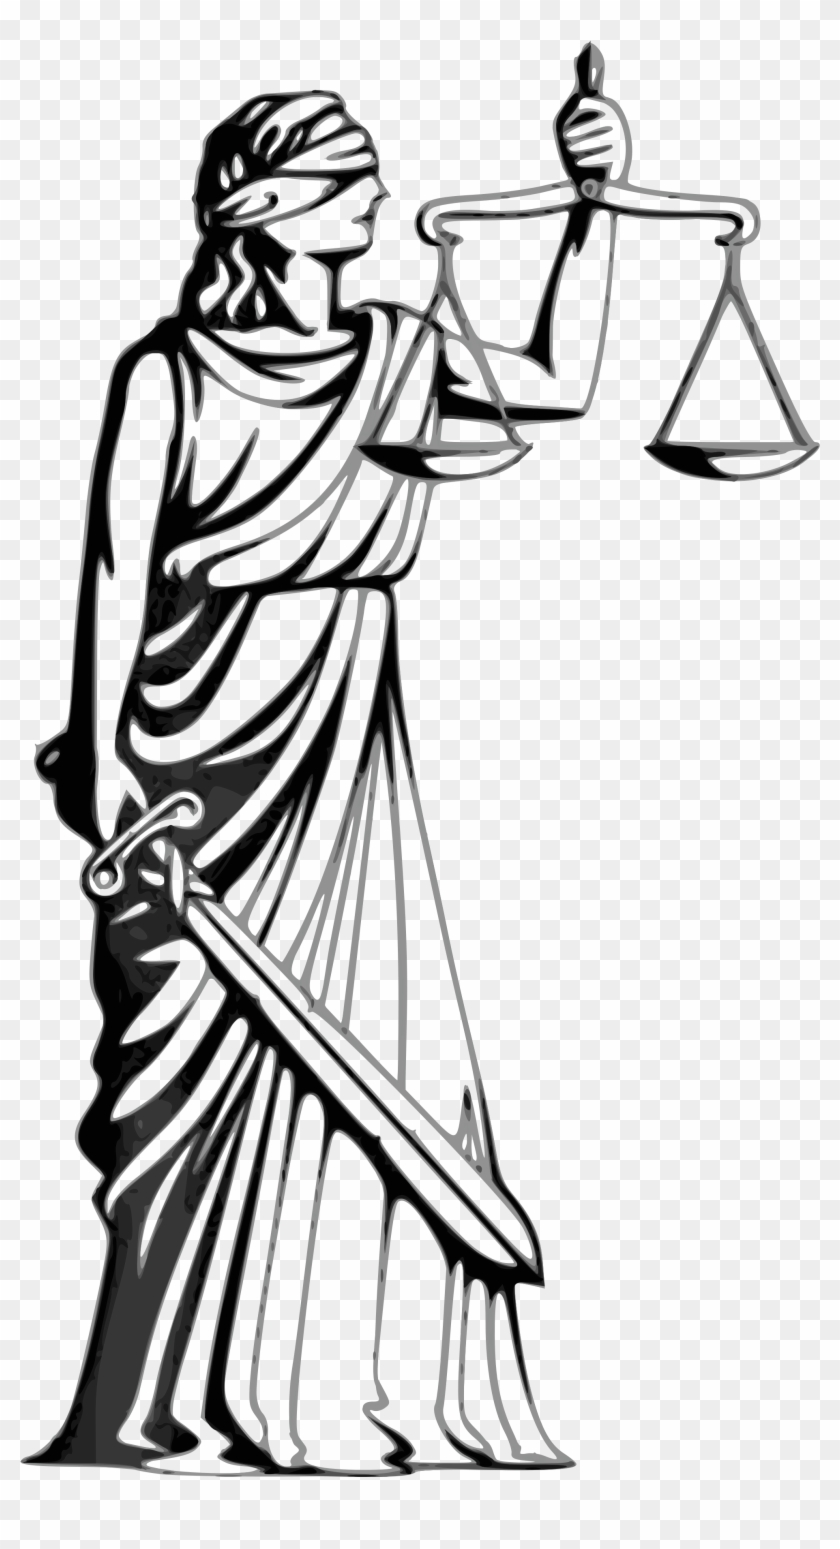 No "fairness Through Unawareness" - Lady Justice White Background #1442276